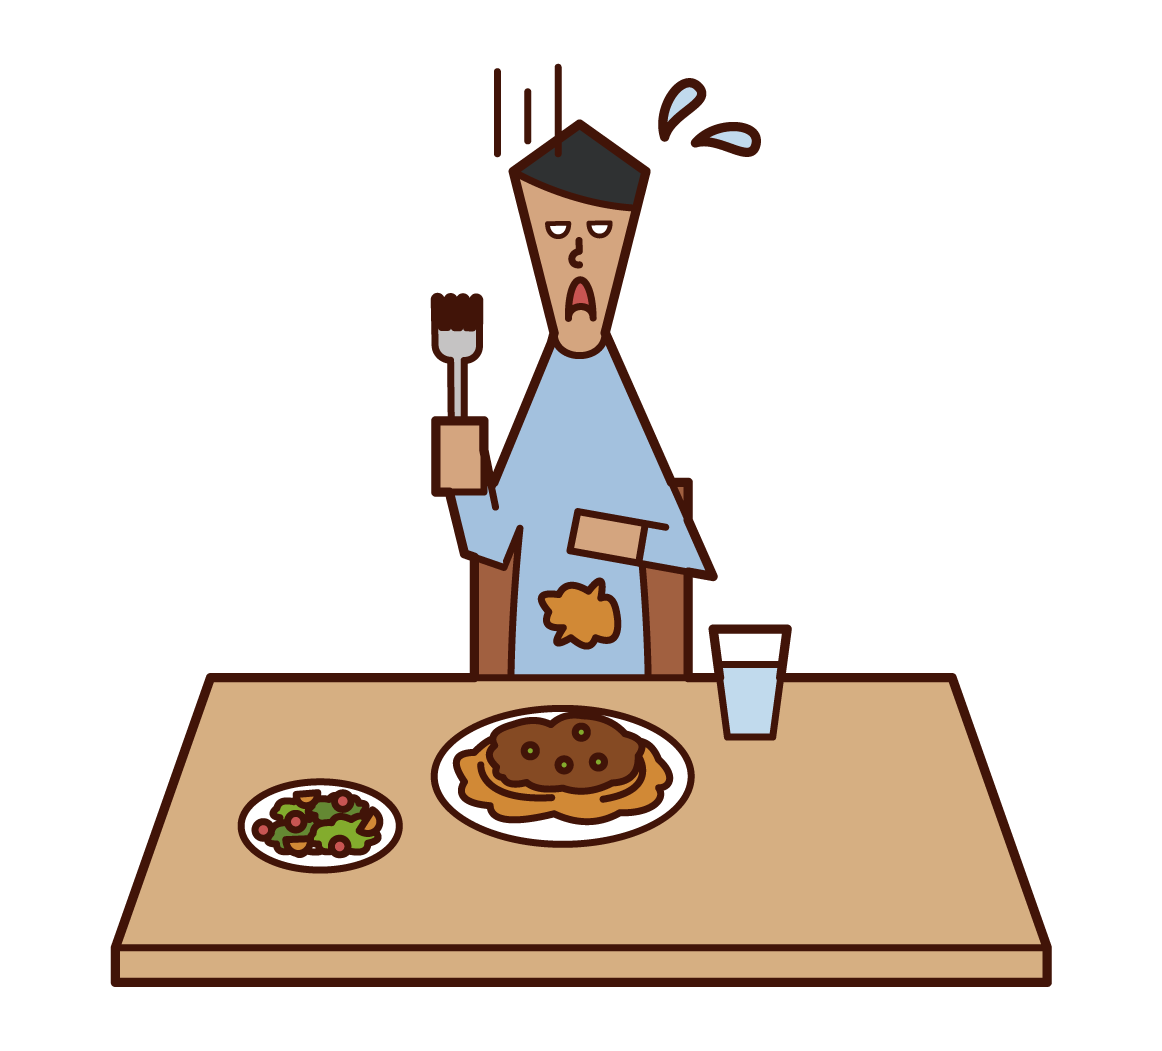 Illustration of a man who spilled food and soiled his clothes